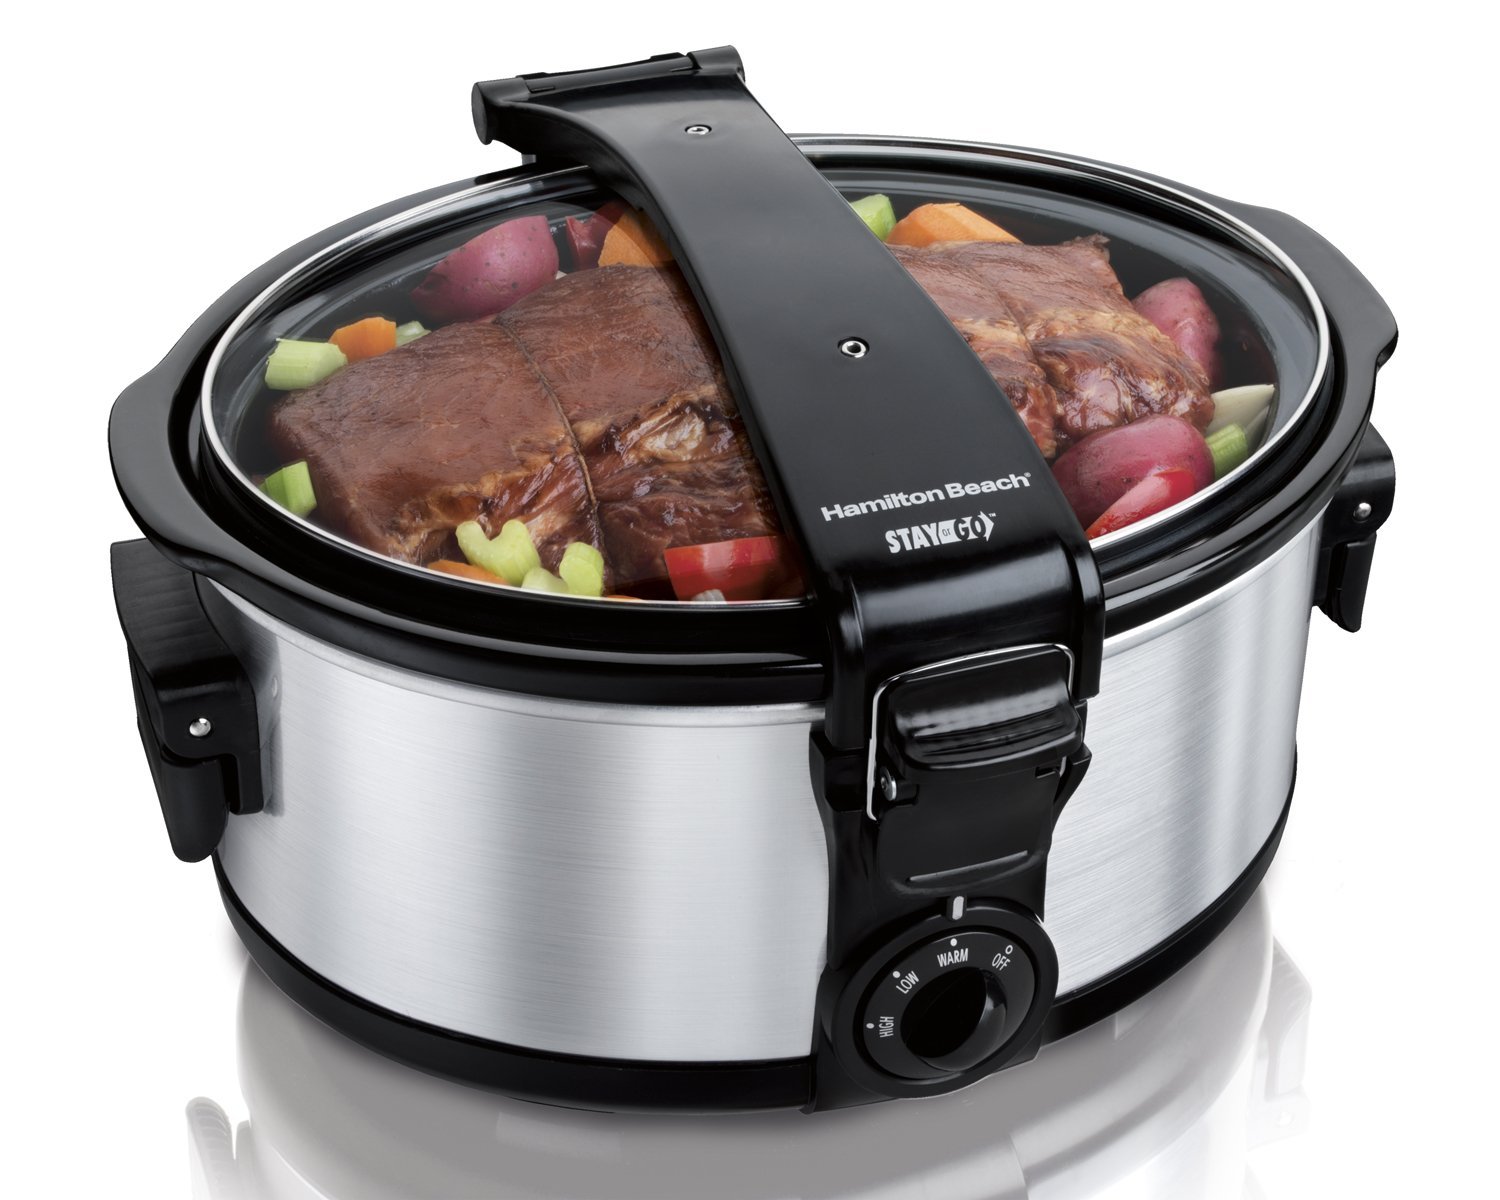 Hamilton Beach Stay or Go 6-Quart Portable Slow Cooker – Just $25.96!